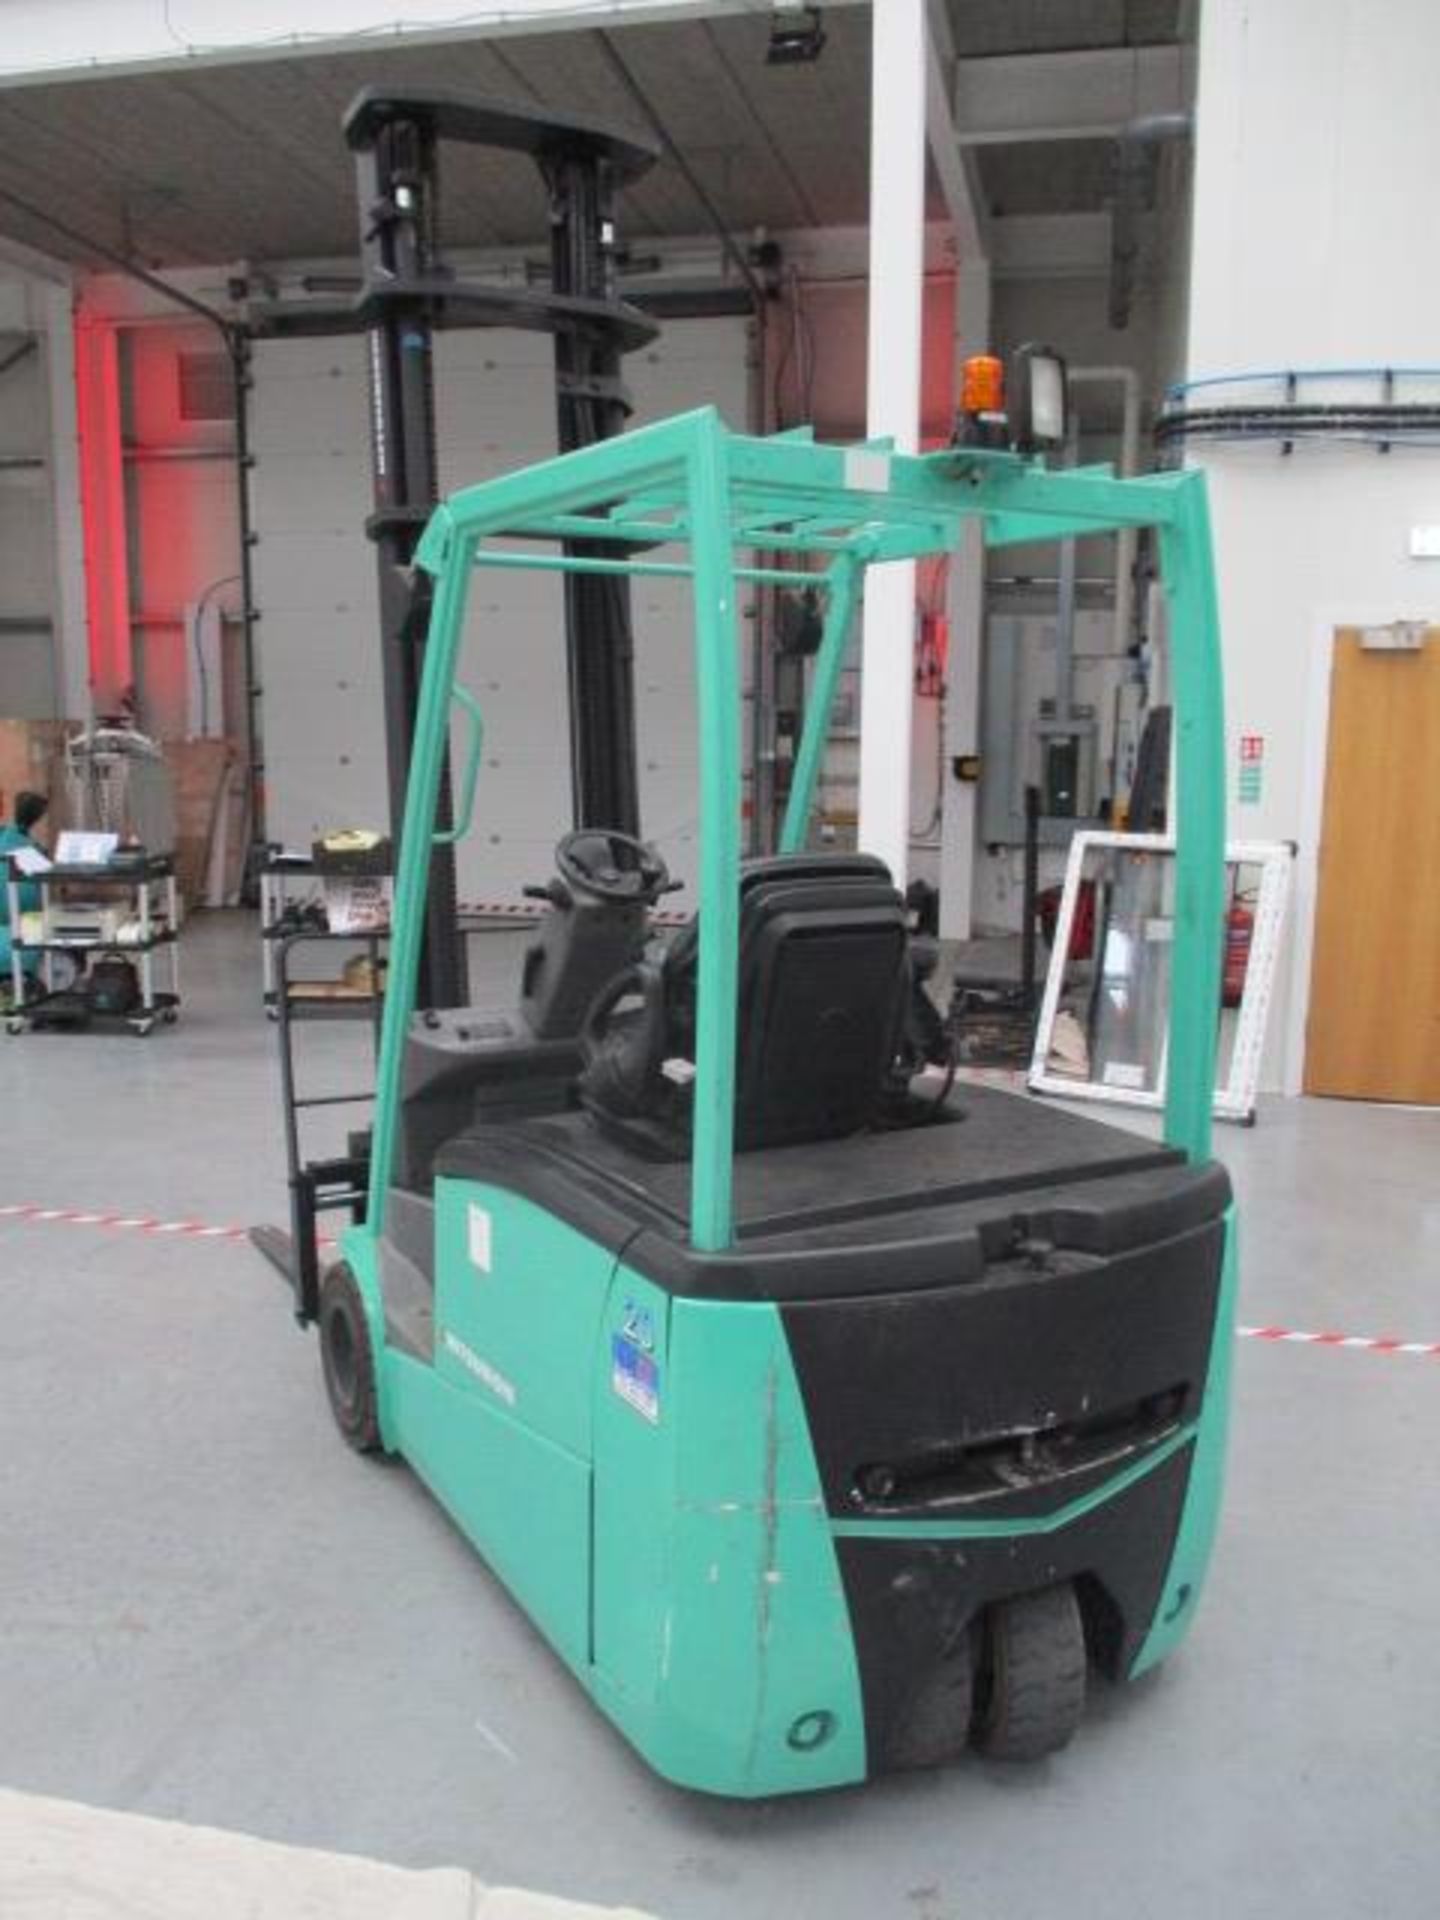 1, Mitsubishi FB20PNT 2 Ton Battery Powered Ride-On Forklift Truck Serial No. EFB2400018 (2012) with - Image 3 of 5